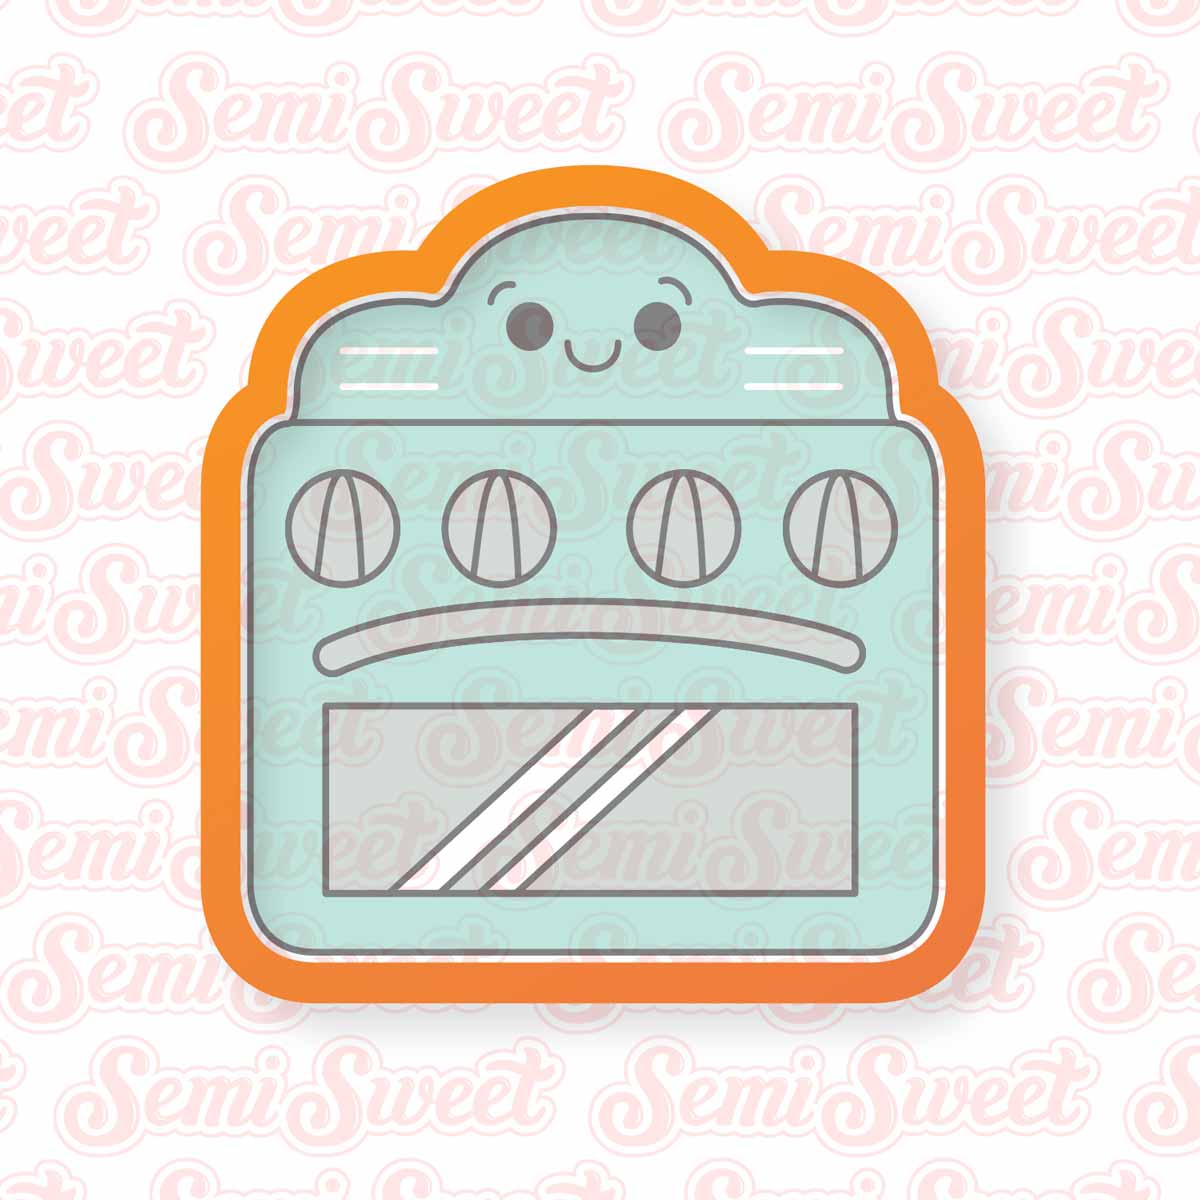 Vintage Oven Cookie Cutter | Semi Sweet Designs